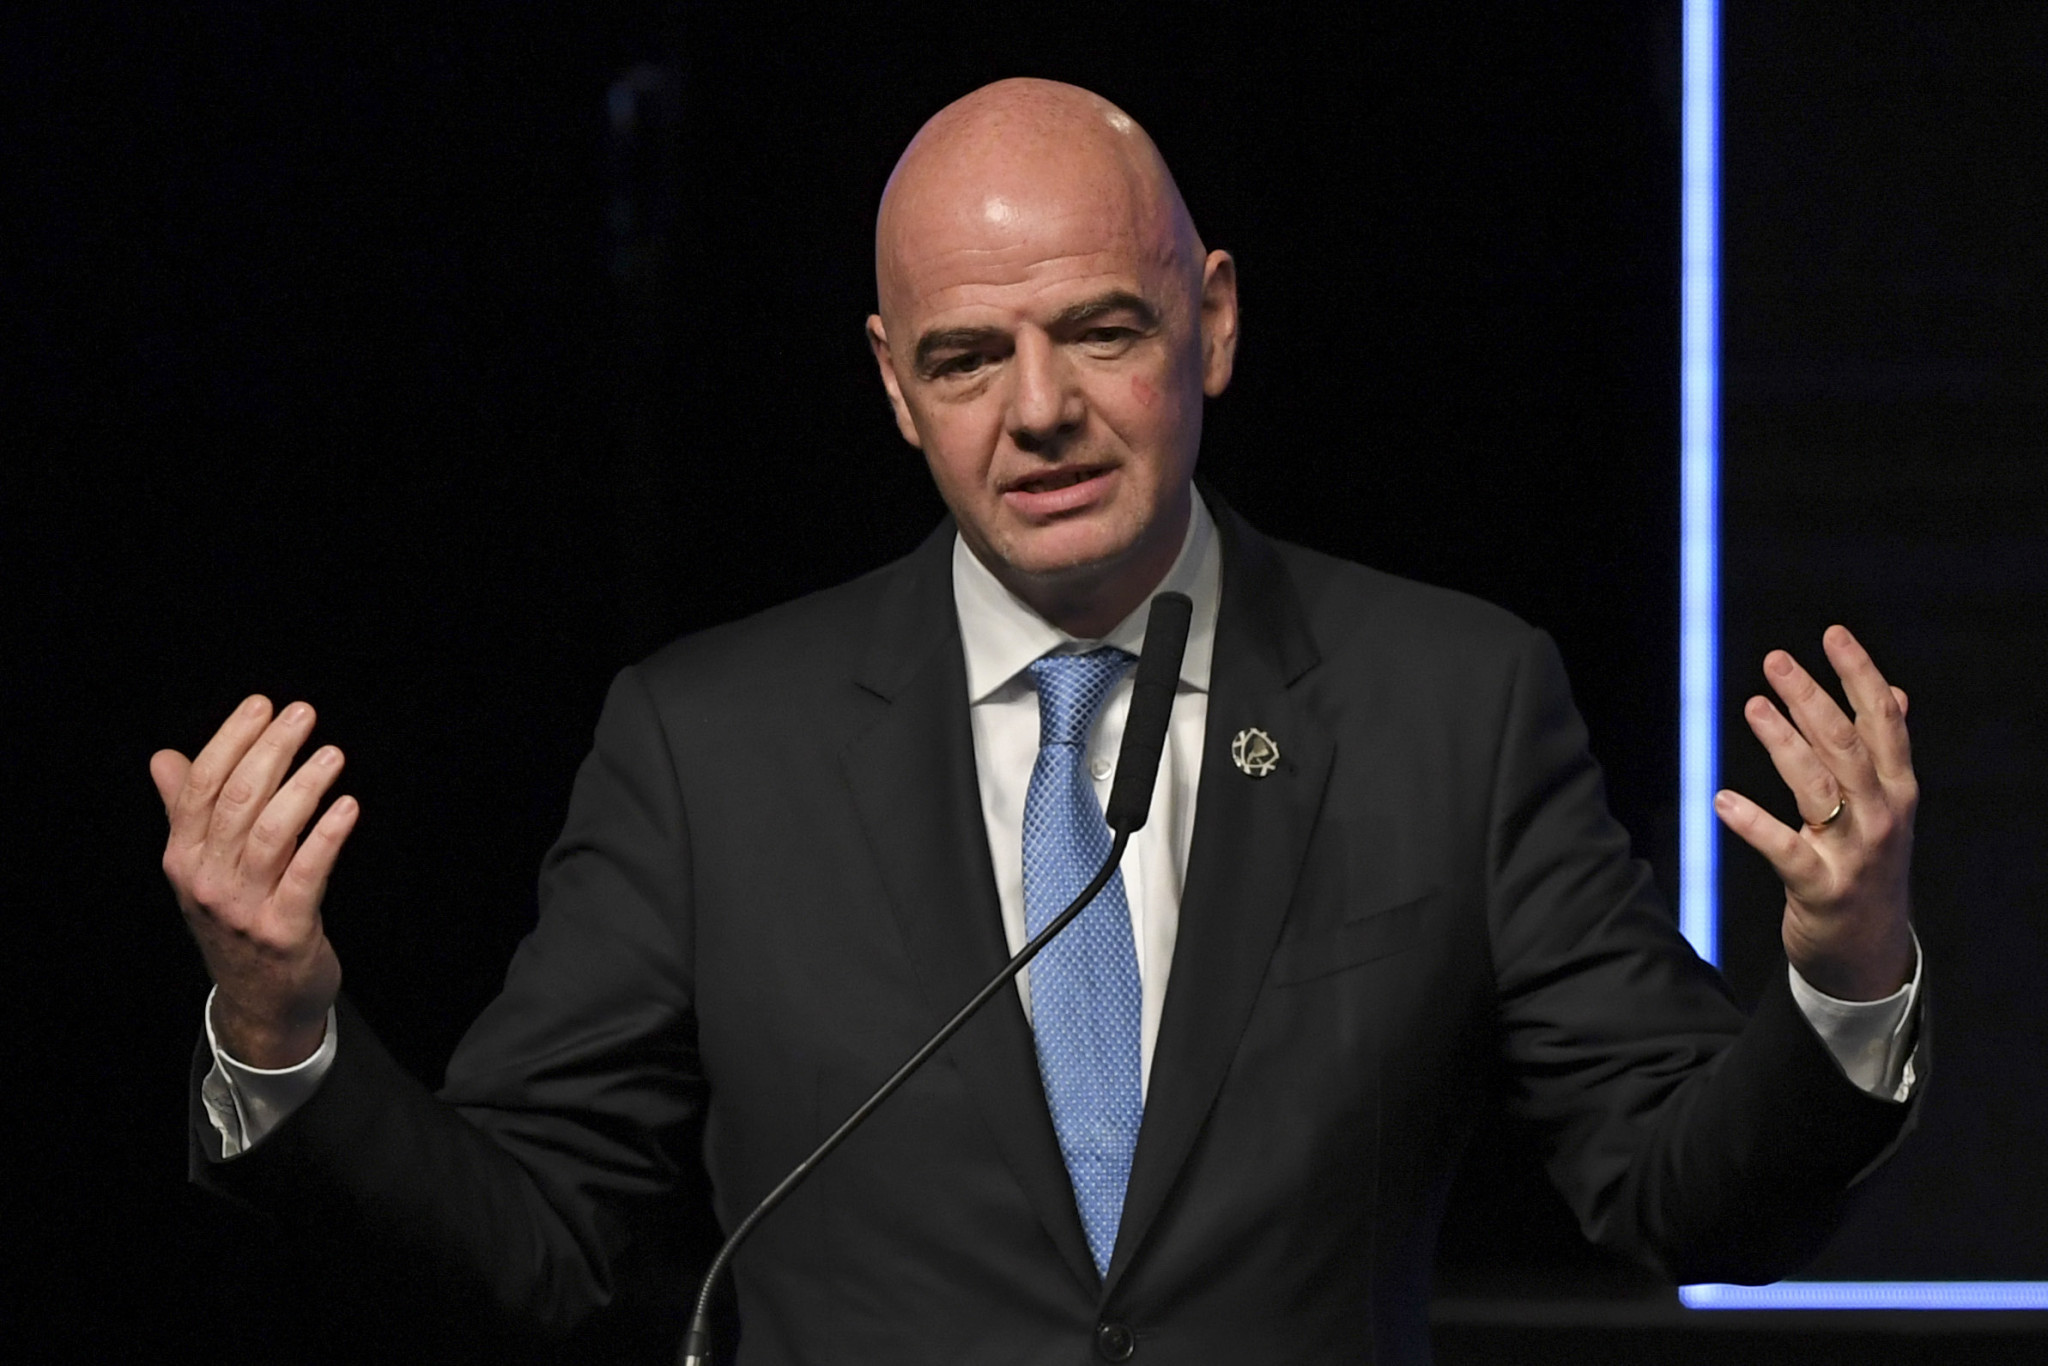 Gianni Infantino has been accused of trying to block Morocco's World Cup bid ©Getty Images